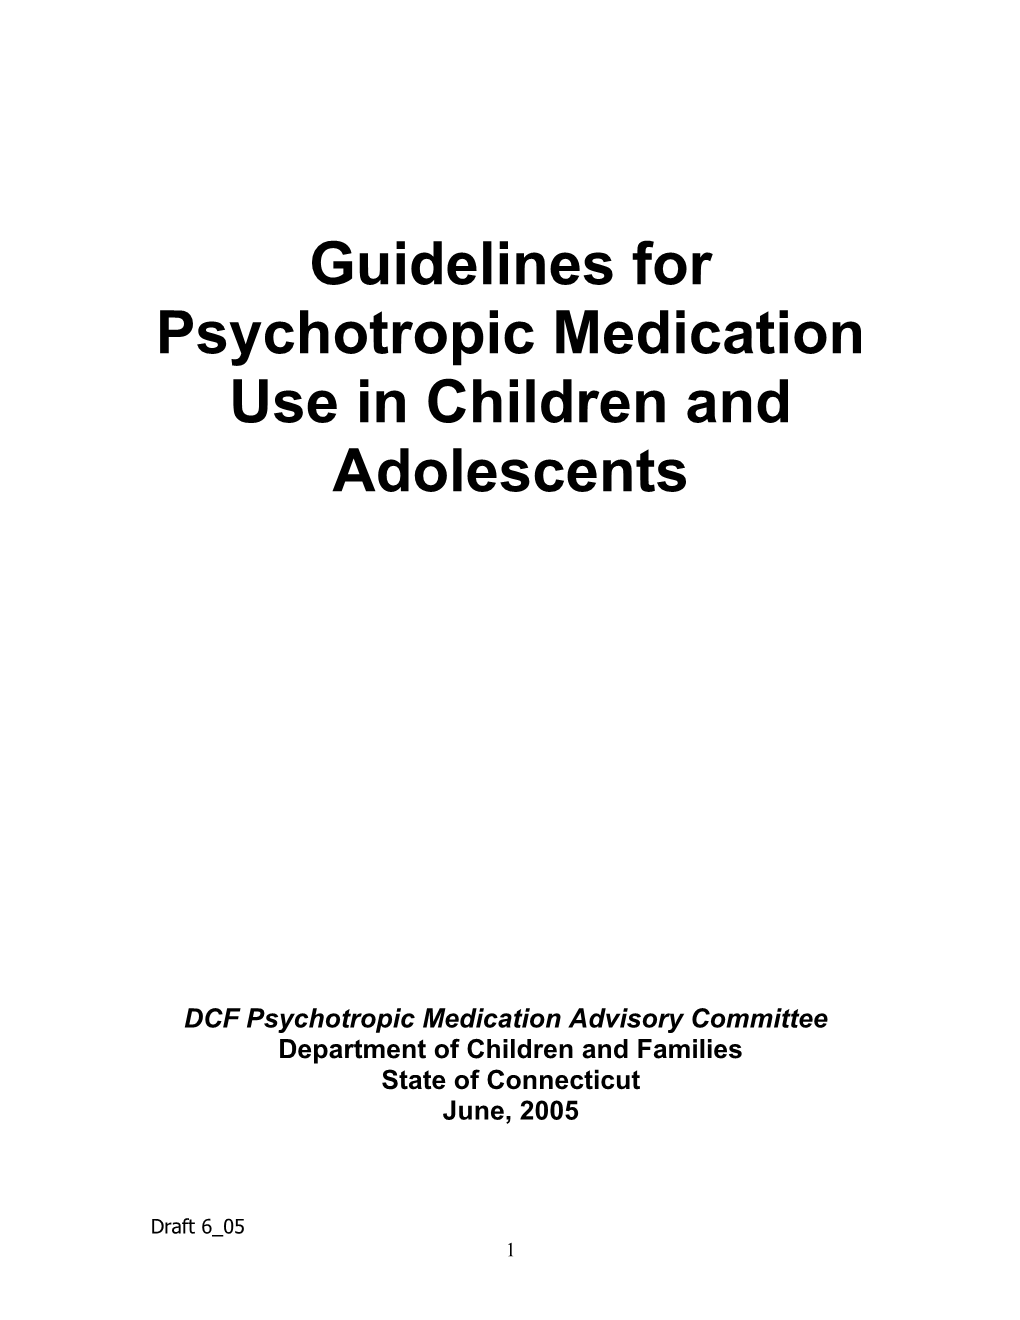 Guidelines for Psychotropic Medication Use in Children and Adolescents